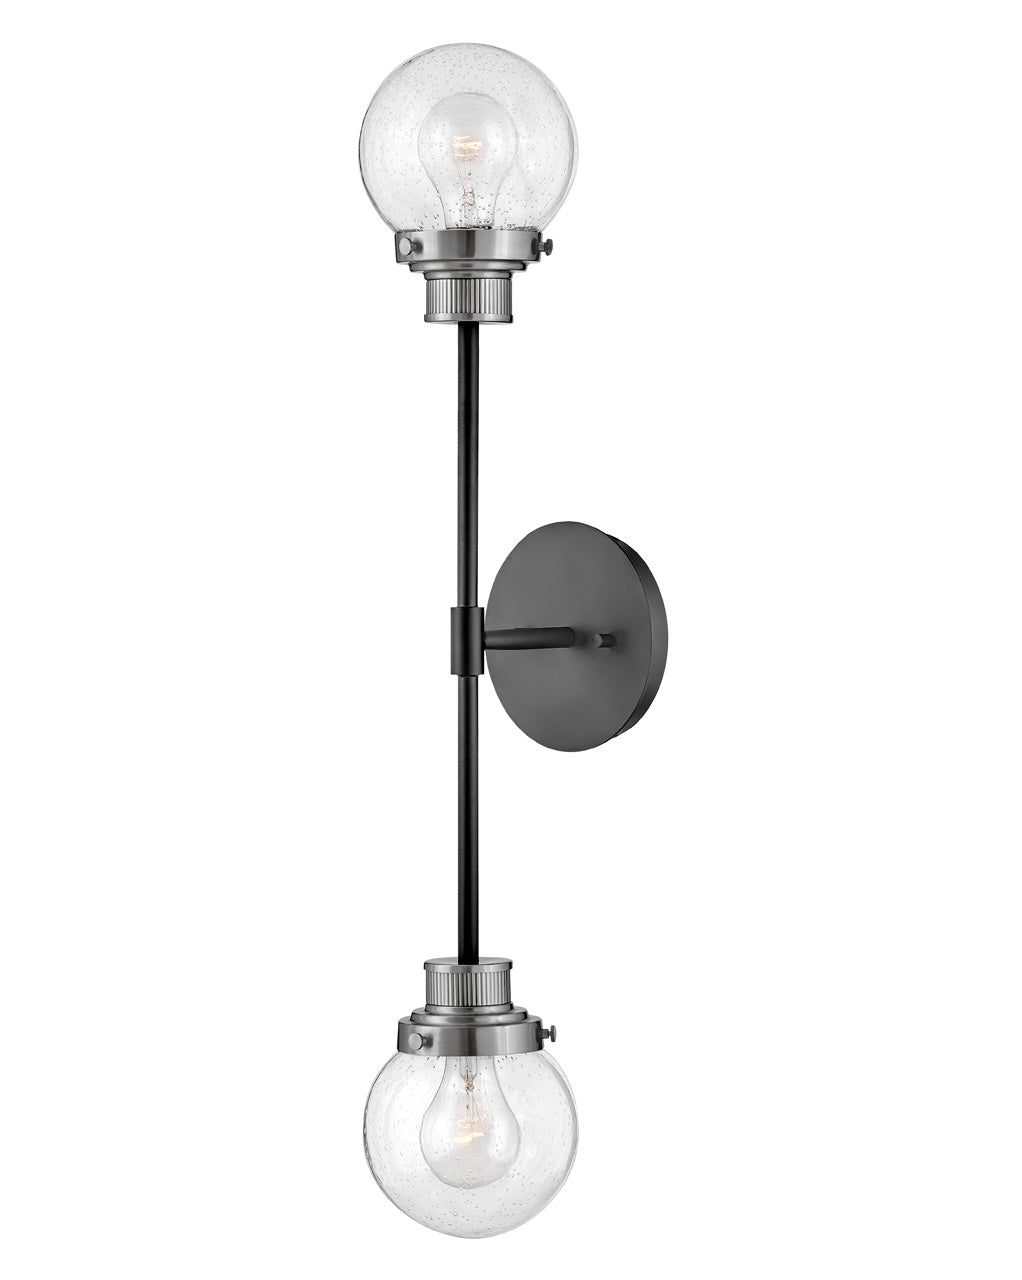 Hinkley Canada - LED Wall Sconce - Poppy - Black with Brushed Nickel accents- Union Lighting Luminaires Decor